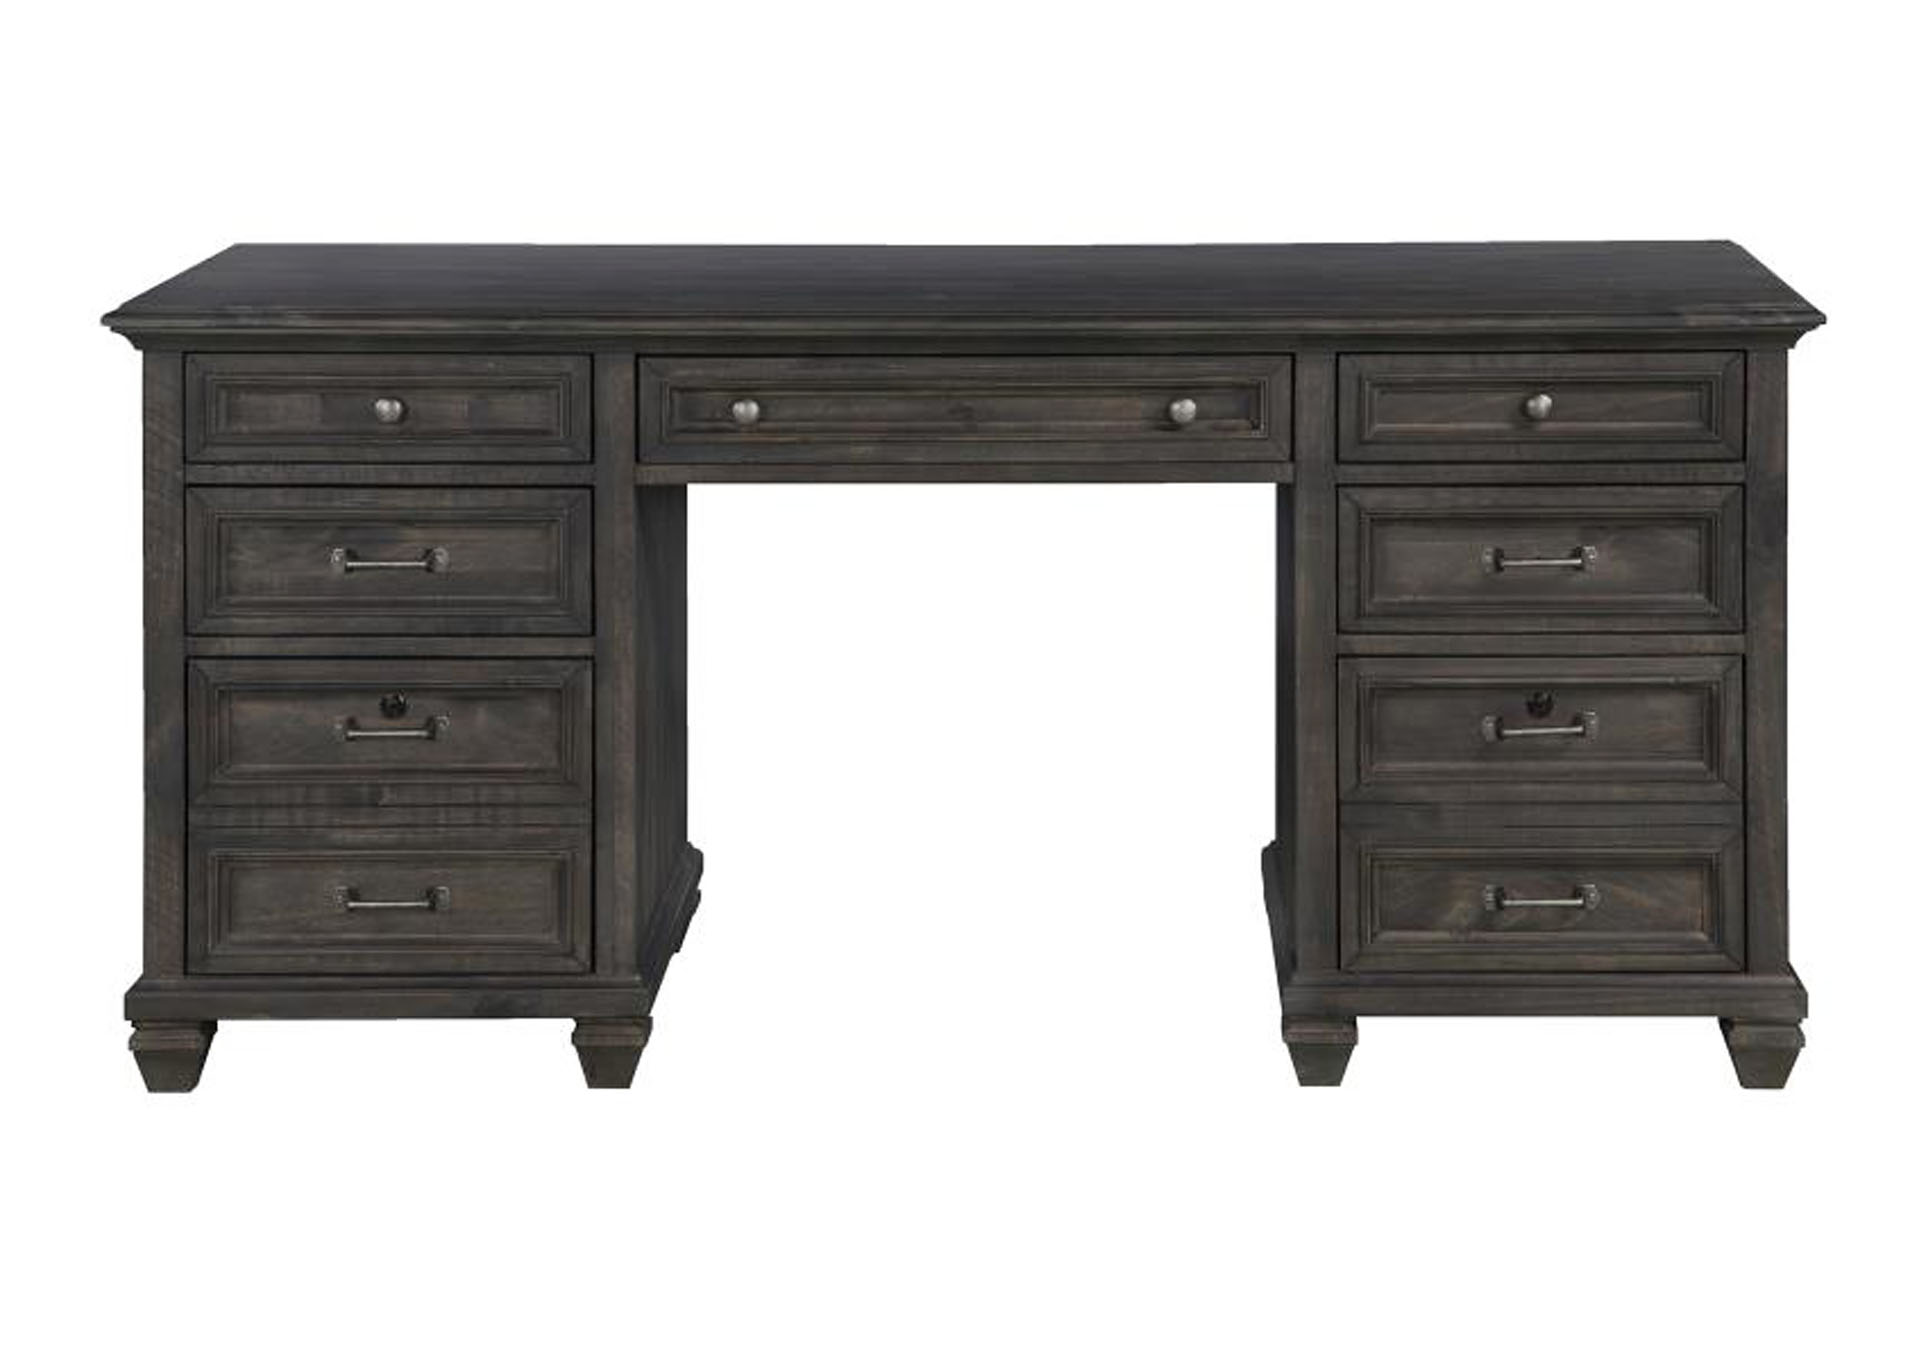 Sutton Place Weathered Charcoal Executive Desk,Magnussen